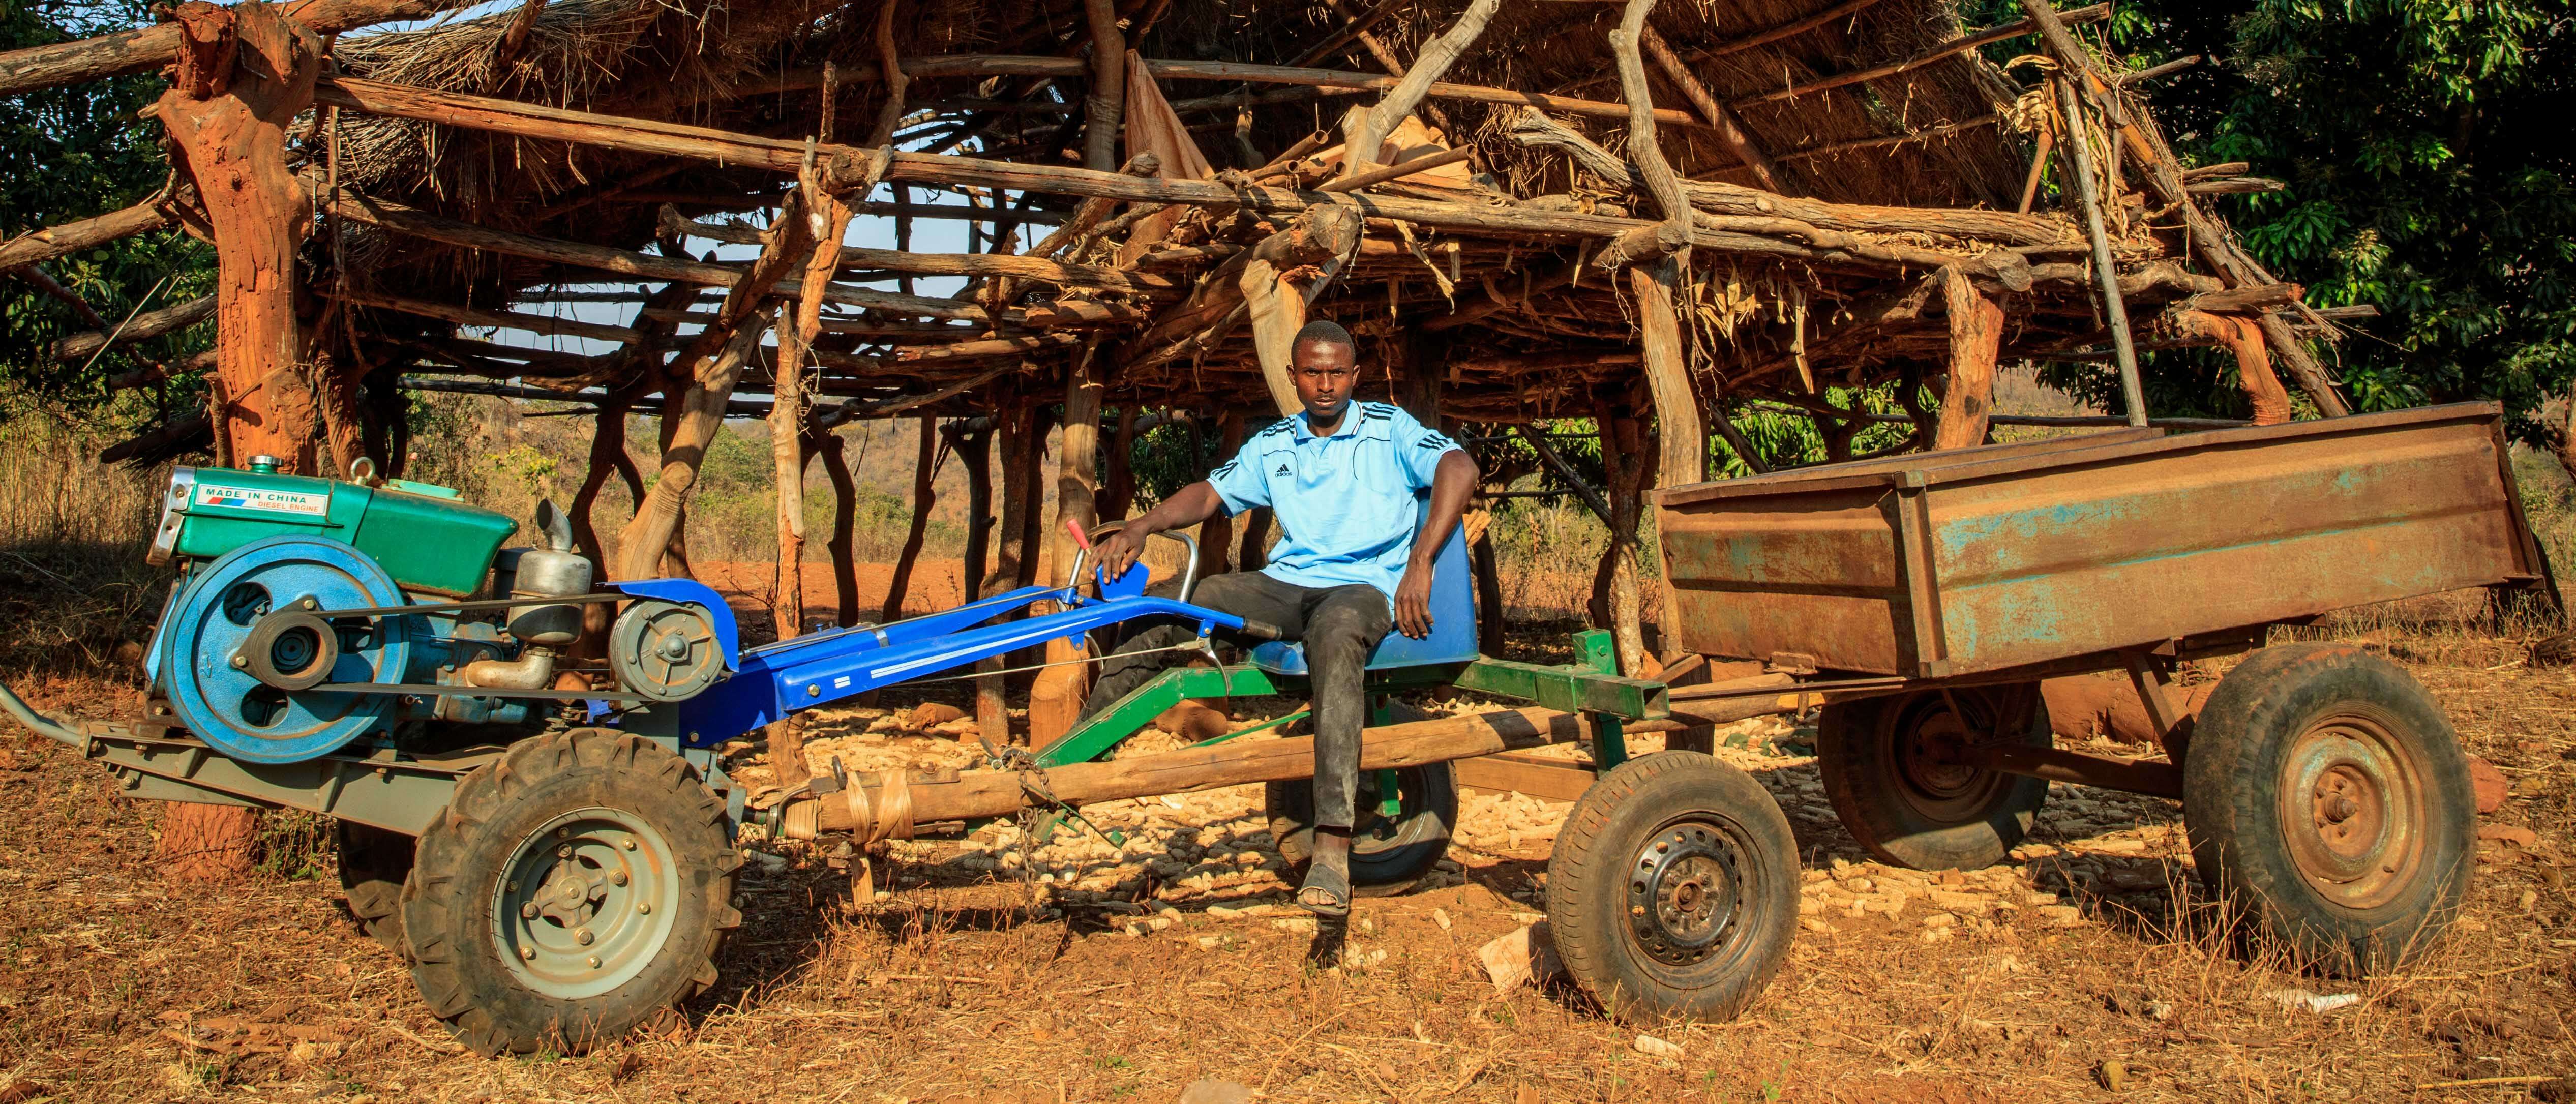 A man sits on a large tractor outside in Zimbabwe.